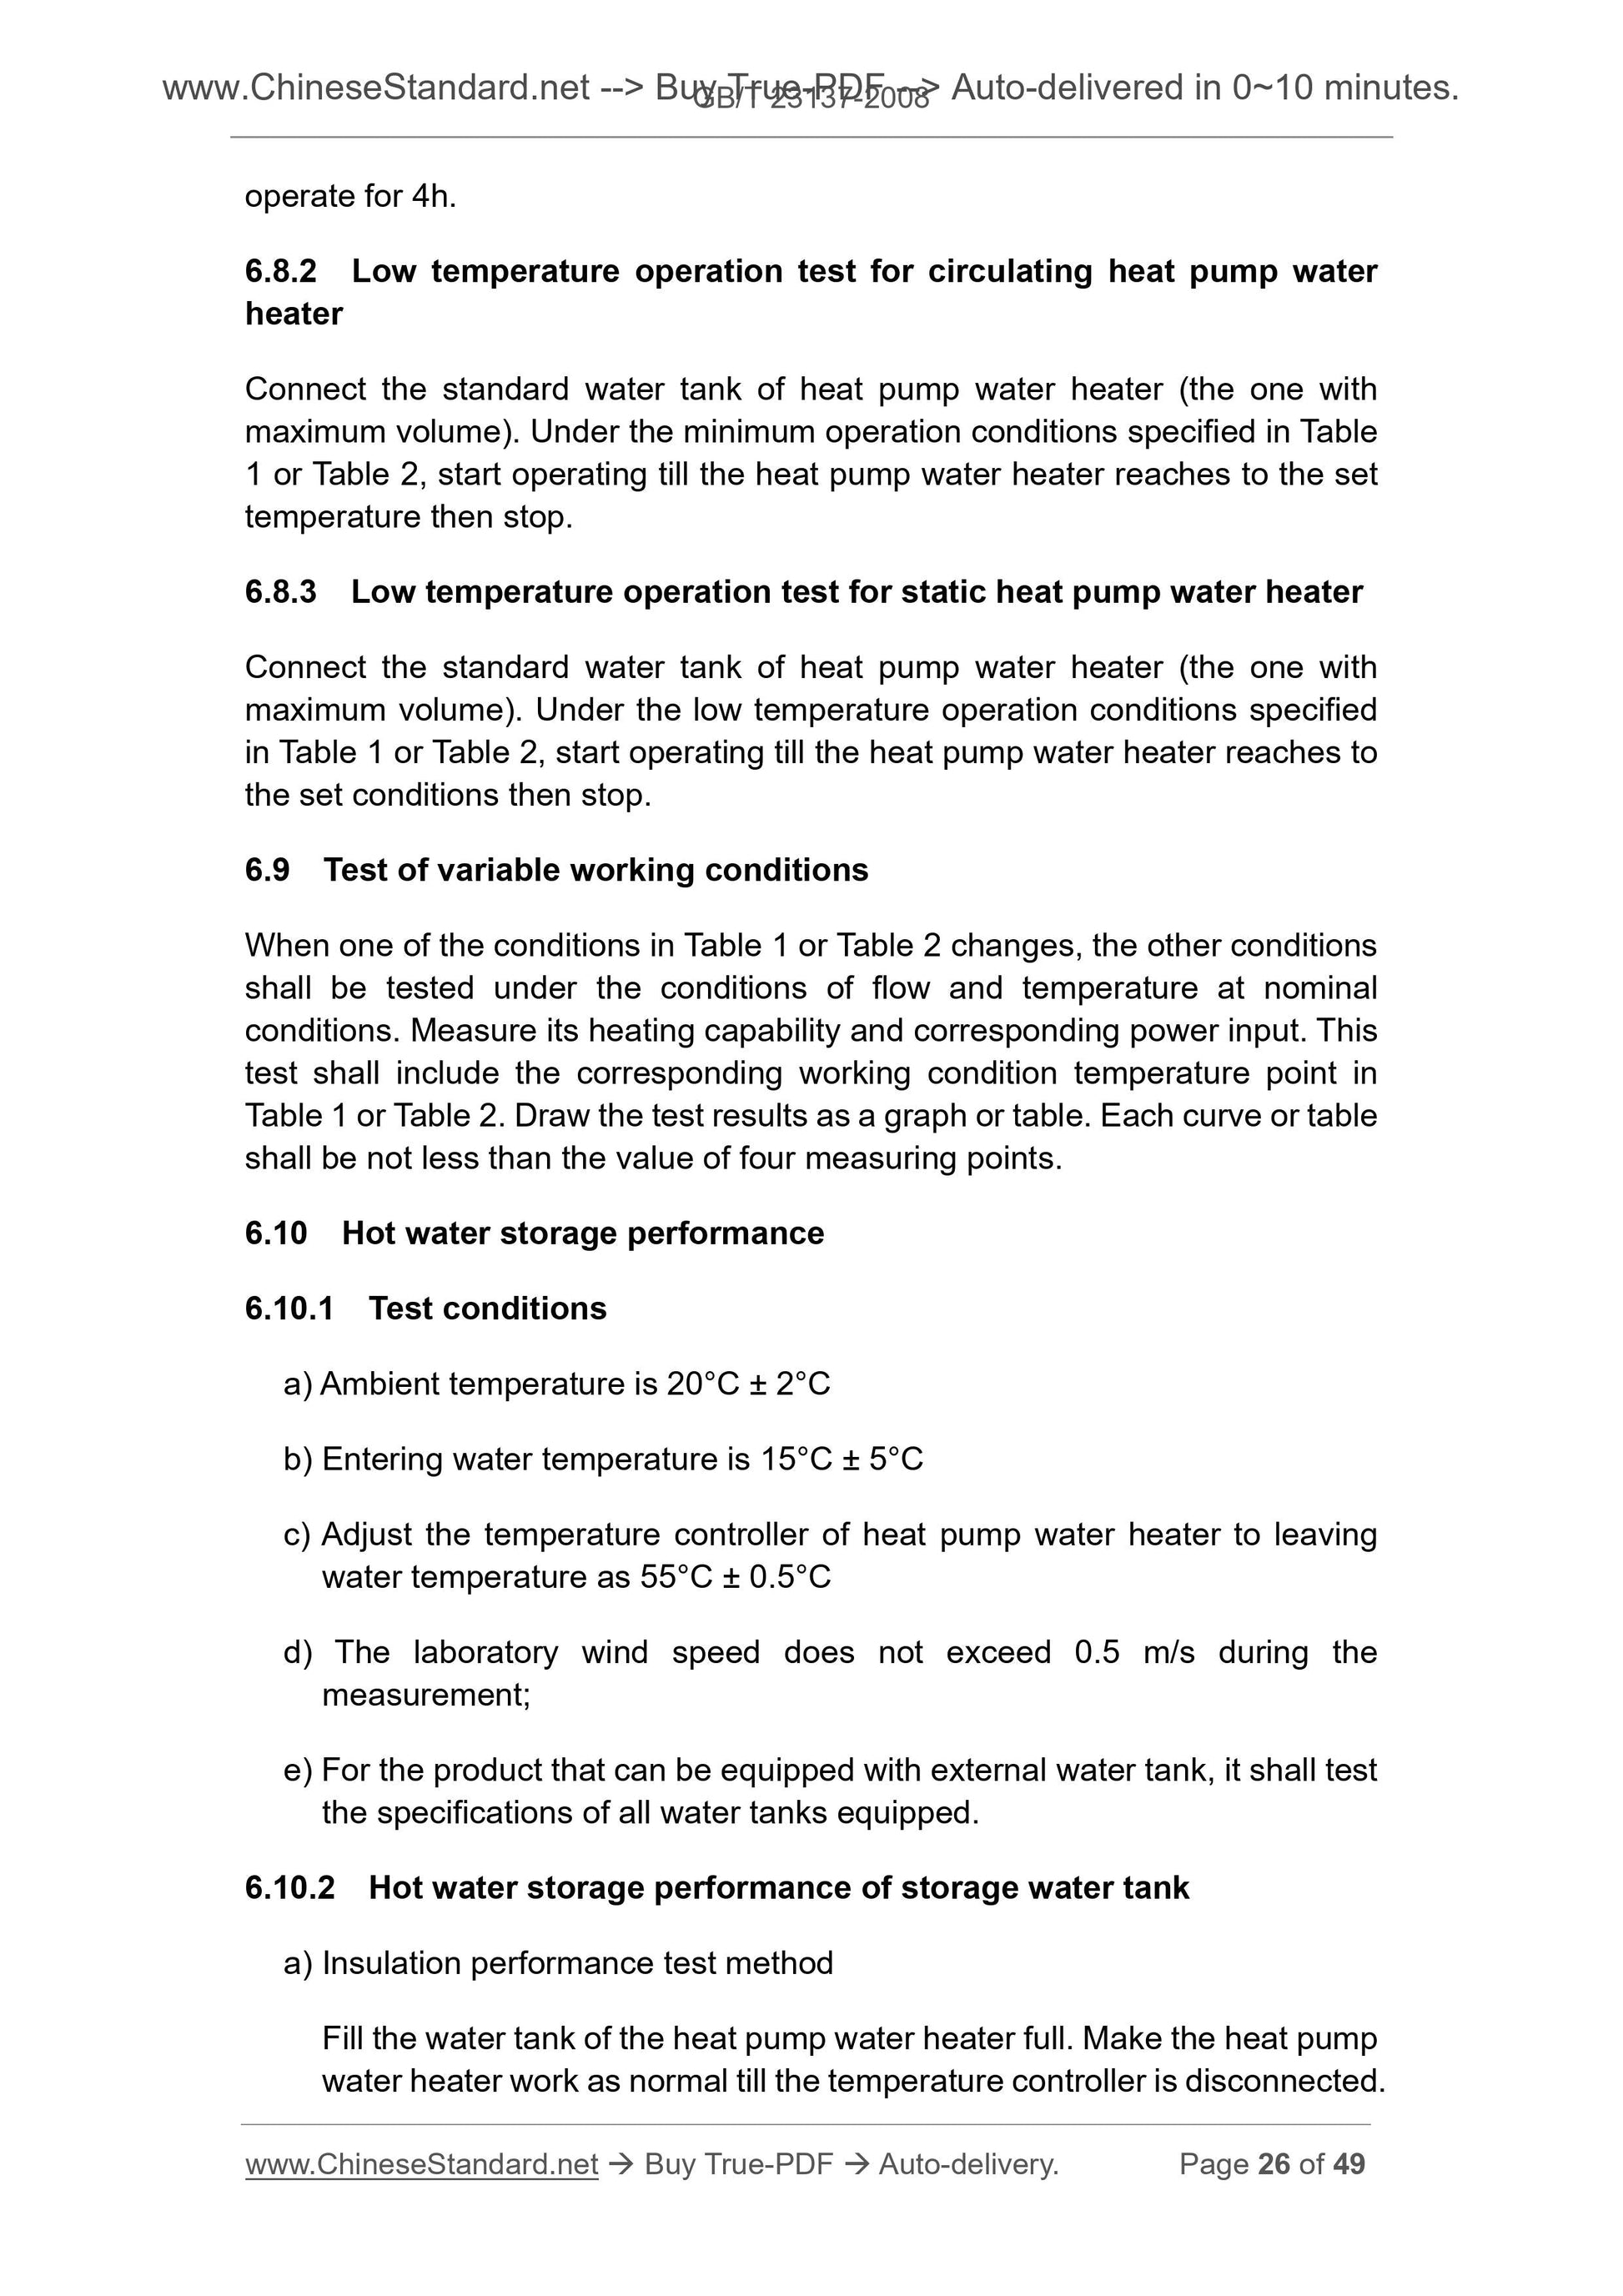 GB/T 23137-2008 Page 12